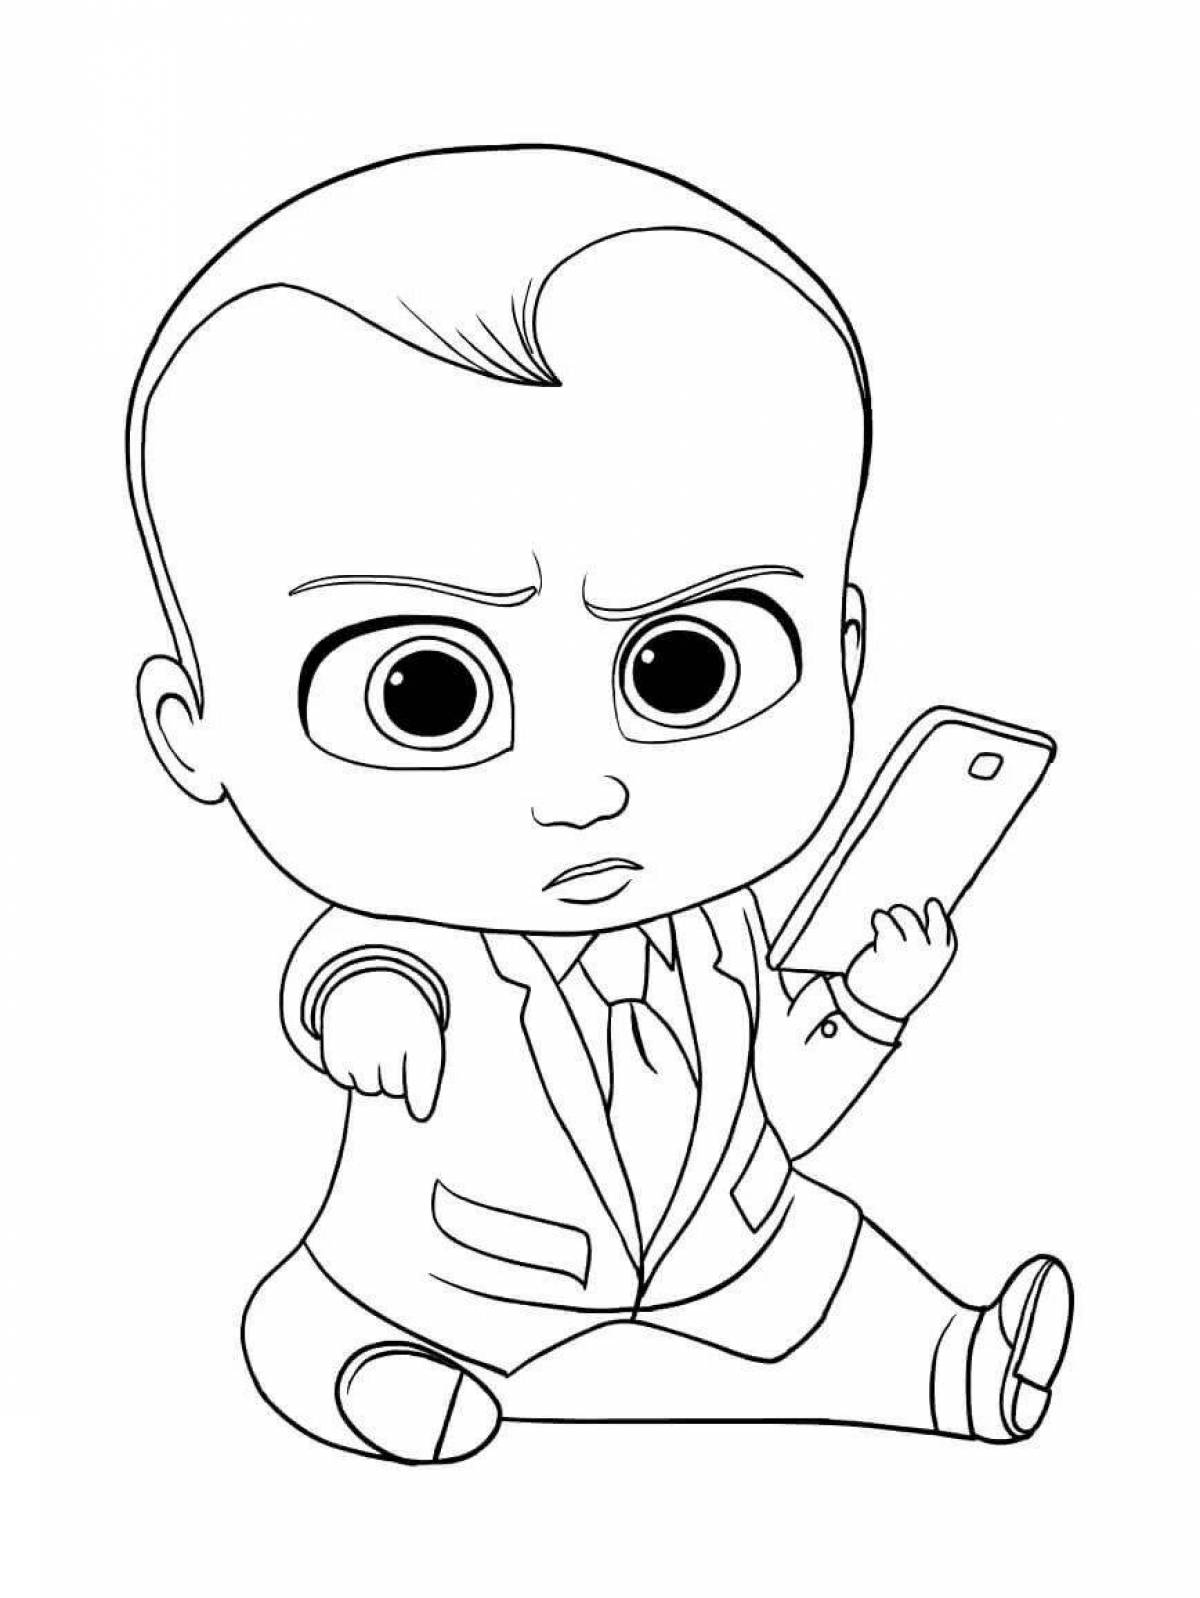 Fabulous coloring page boss baby figure